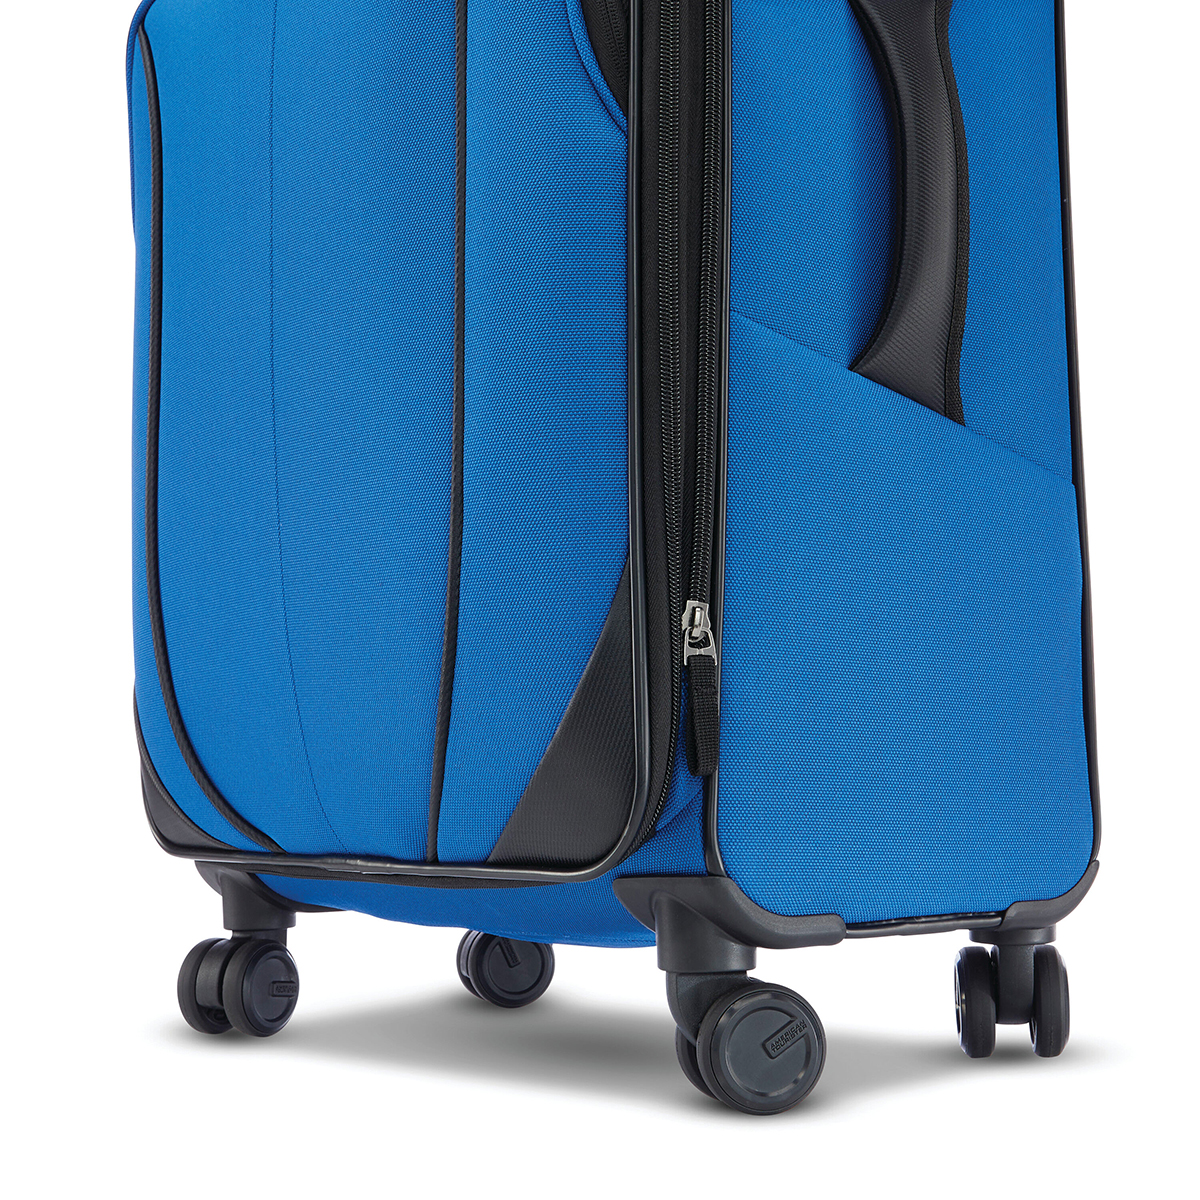 American Tourister(R) 4 Kix 2.0 28in. Spinner Luggage